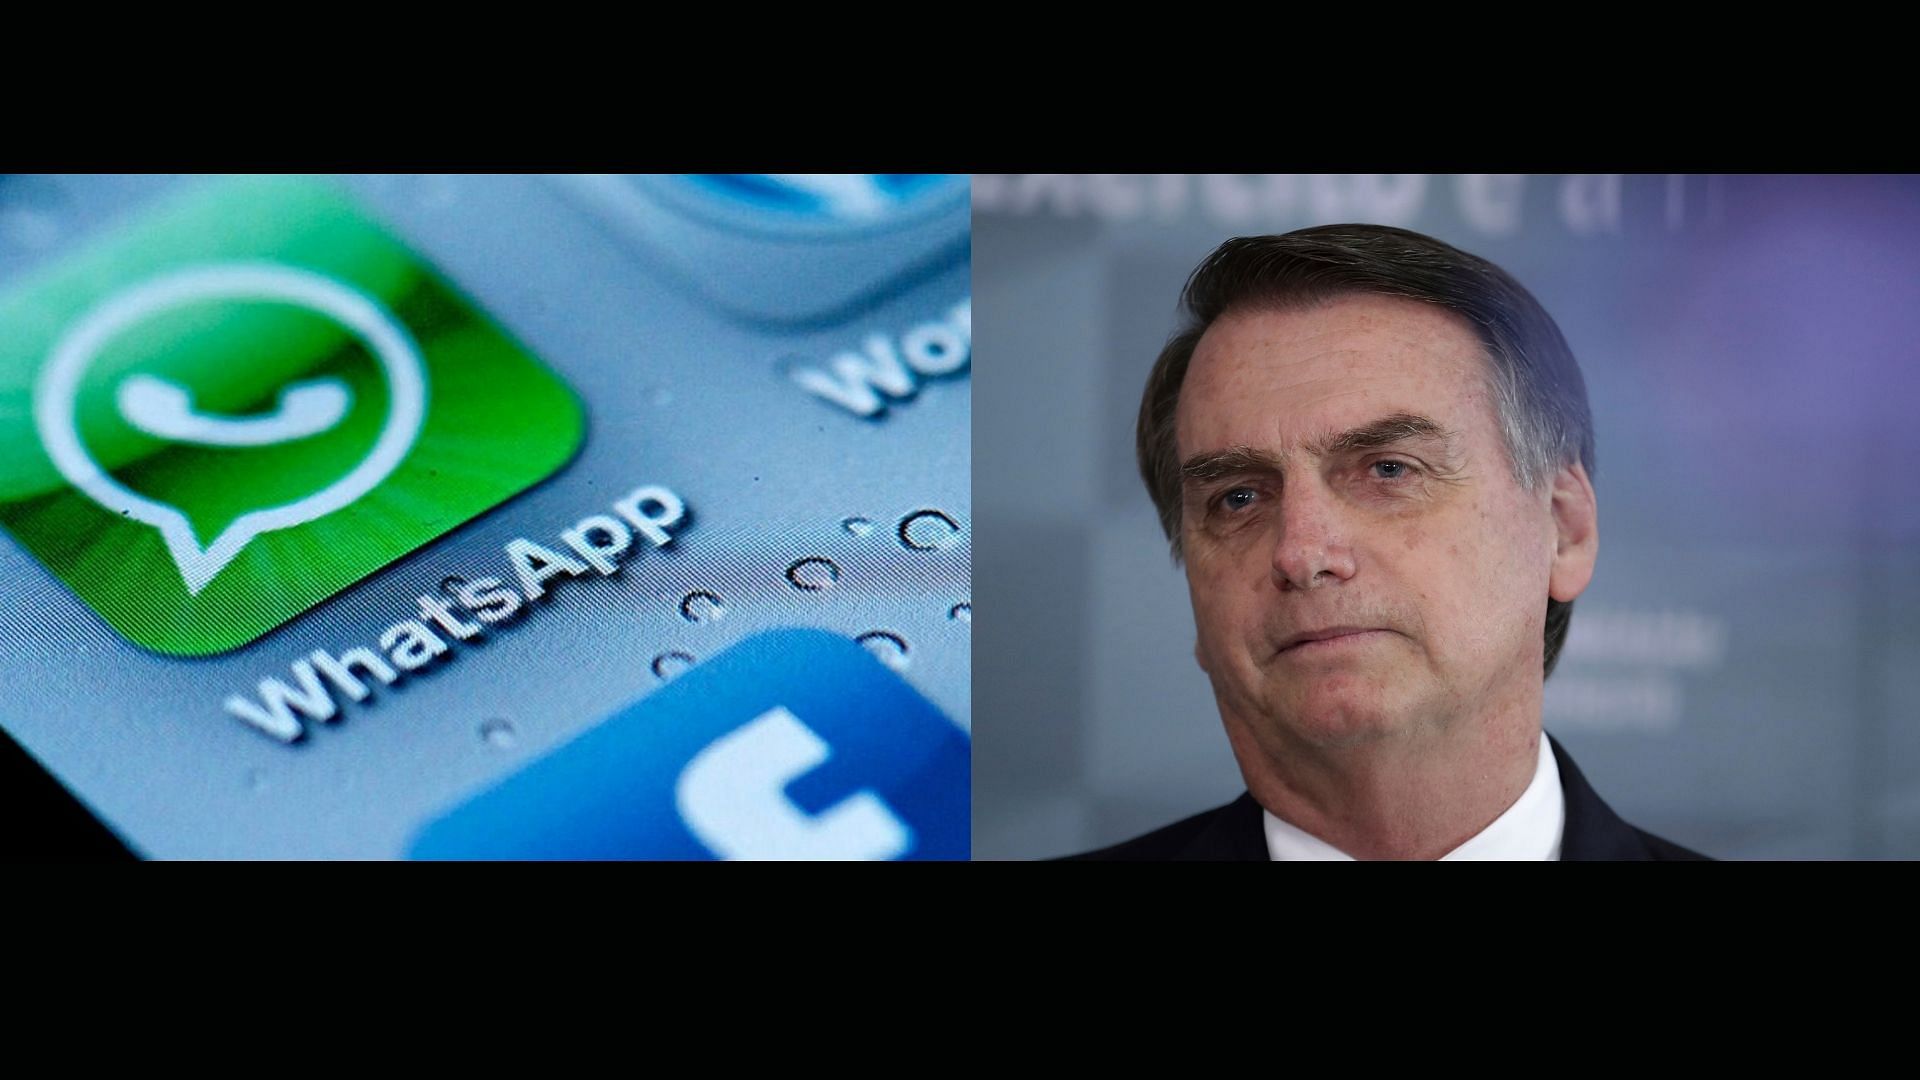 The misinformation strategy was effective because WhatsApp is an essential communication tool in Brazil, used by 120 million of its 210 million citizens.